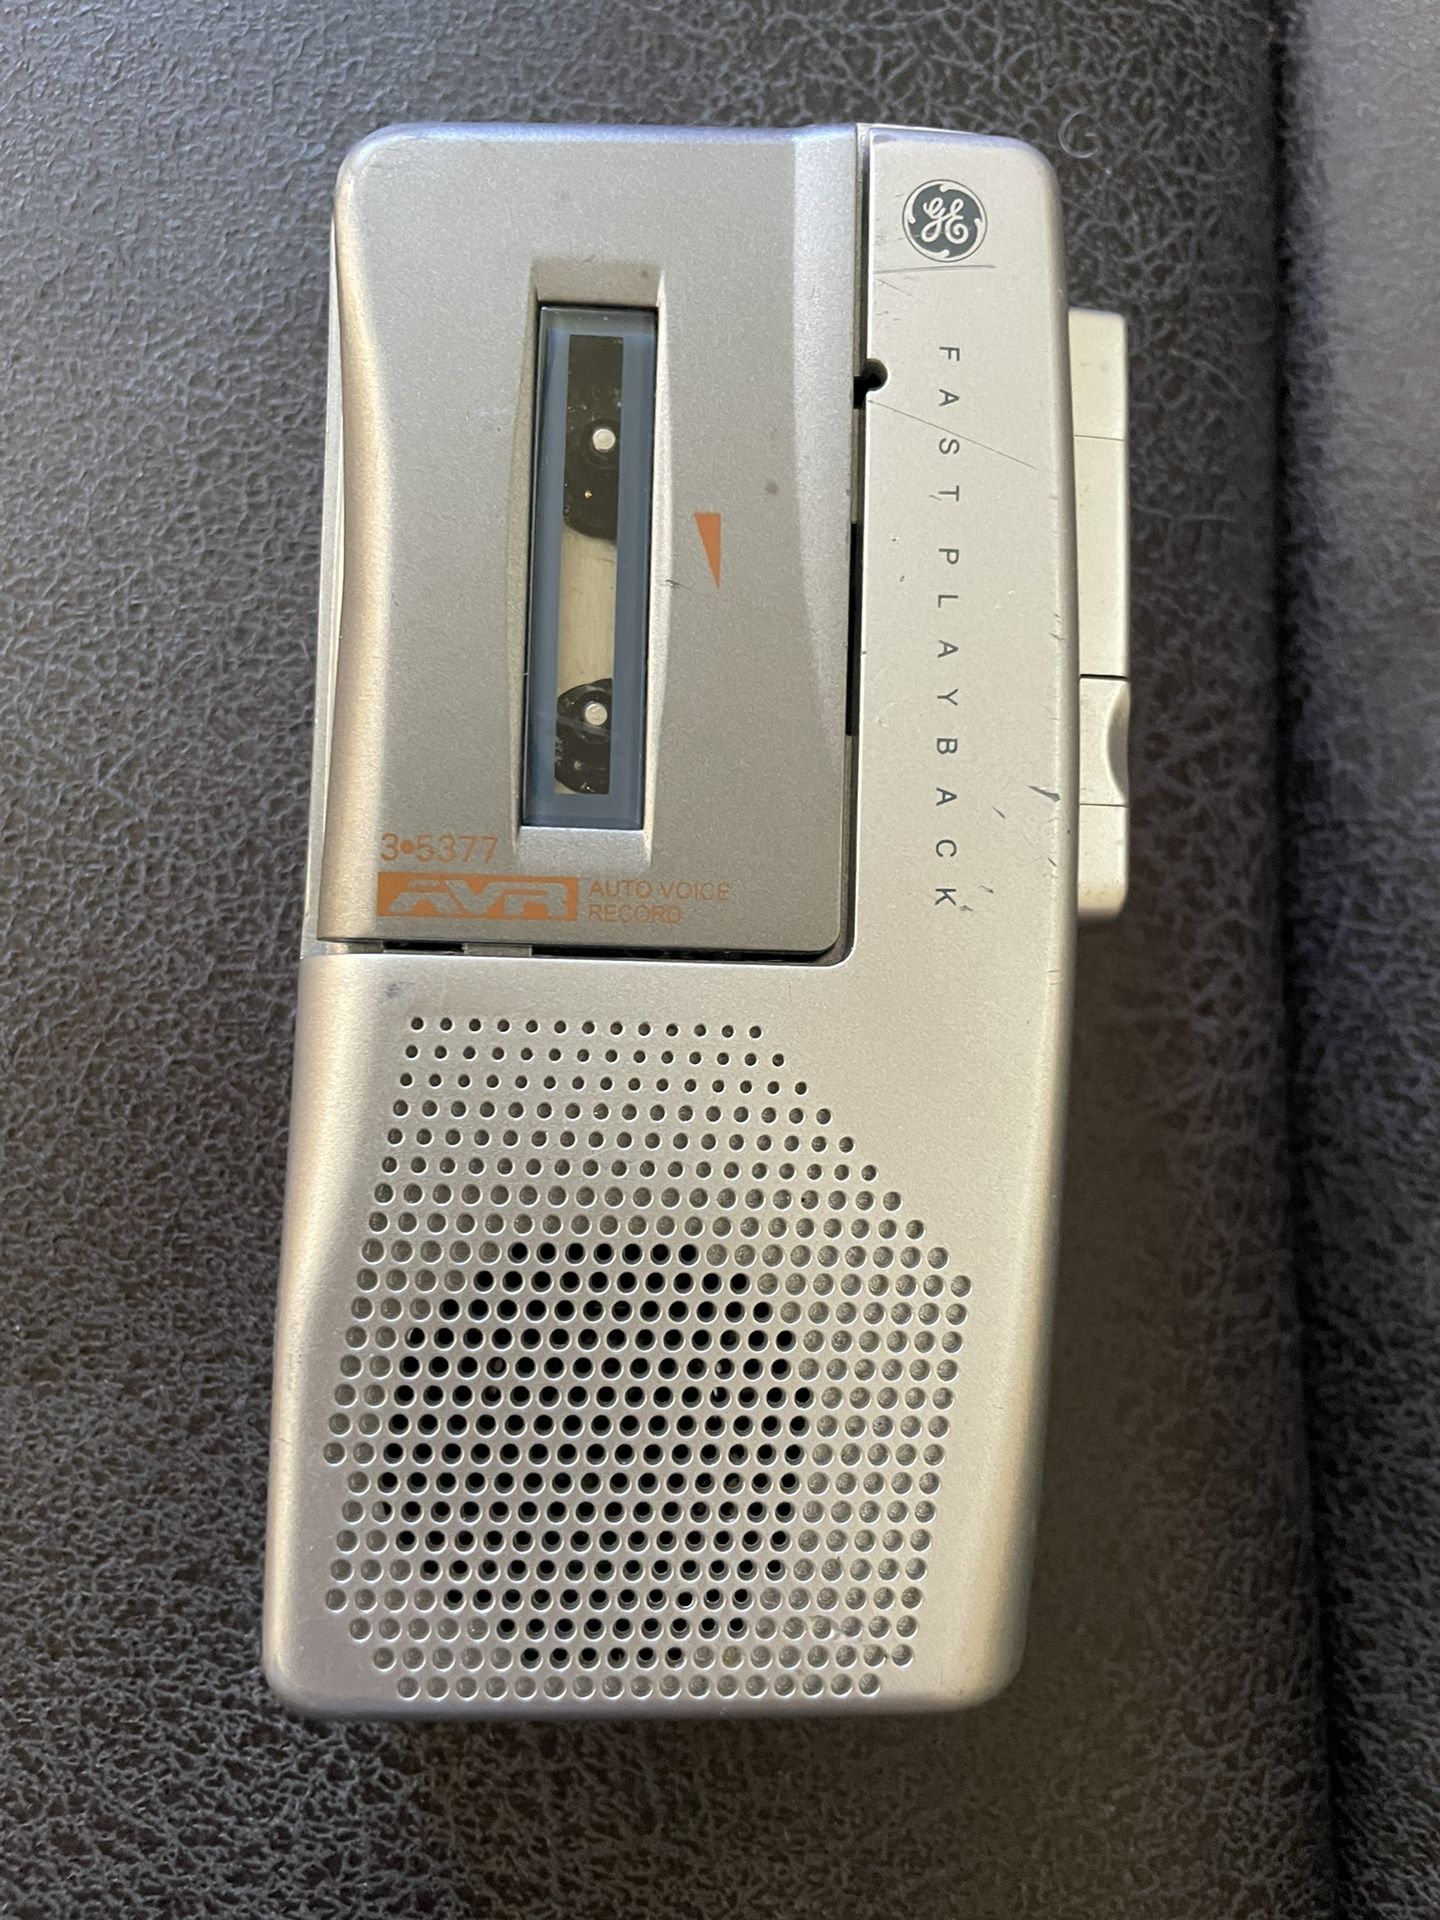 General Electric Fast playback Model 3-5377 auto voice microcassette recorder